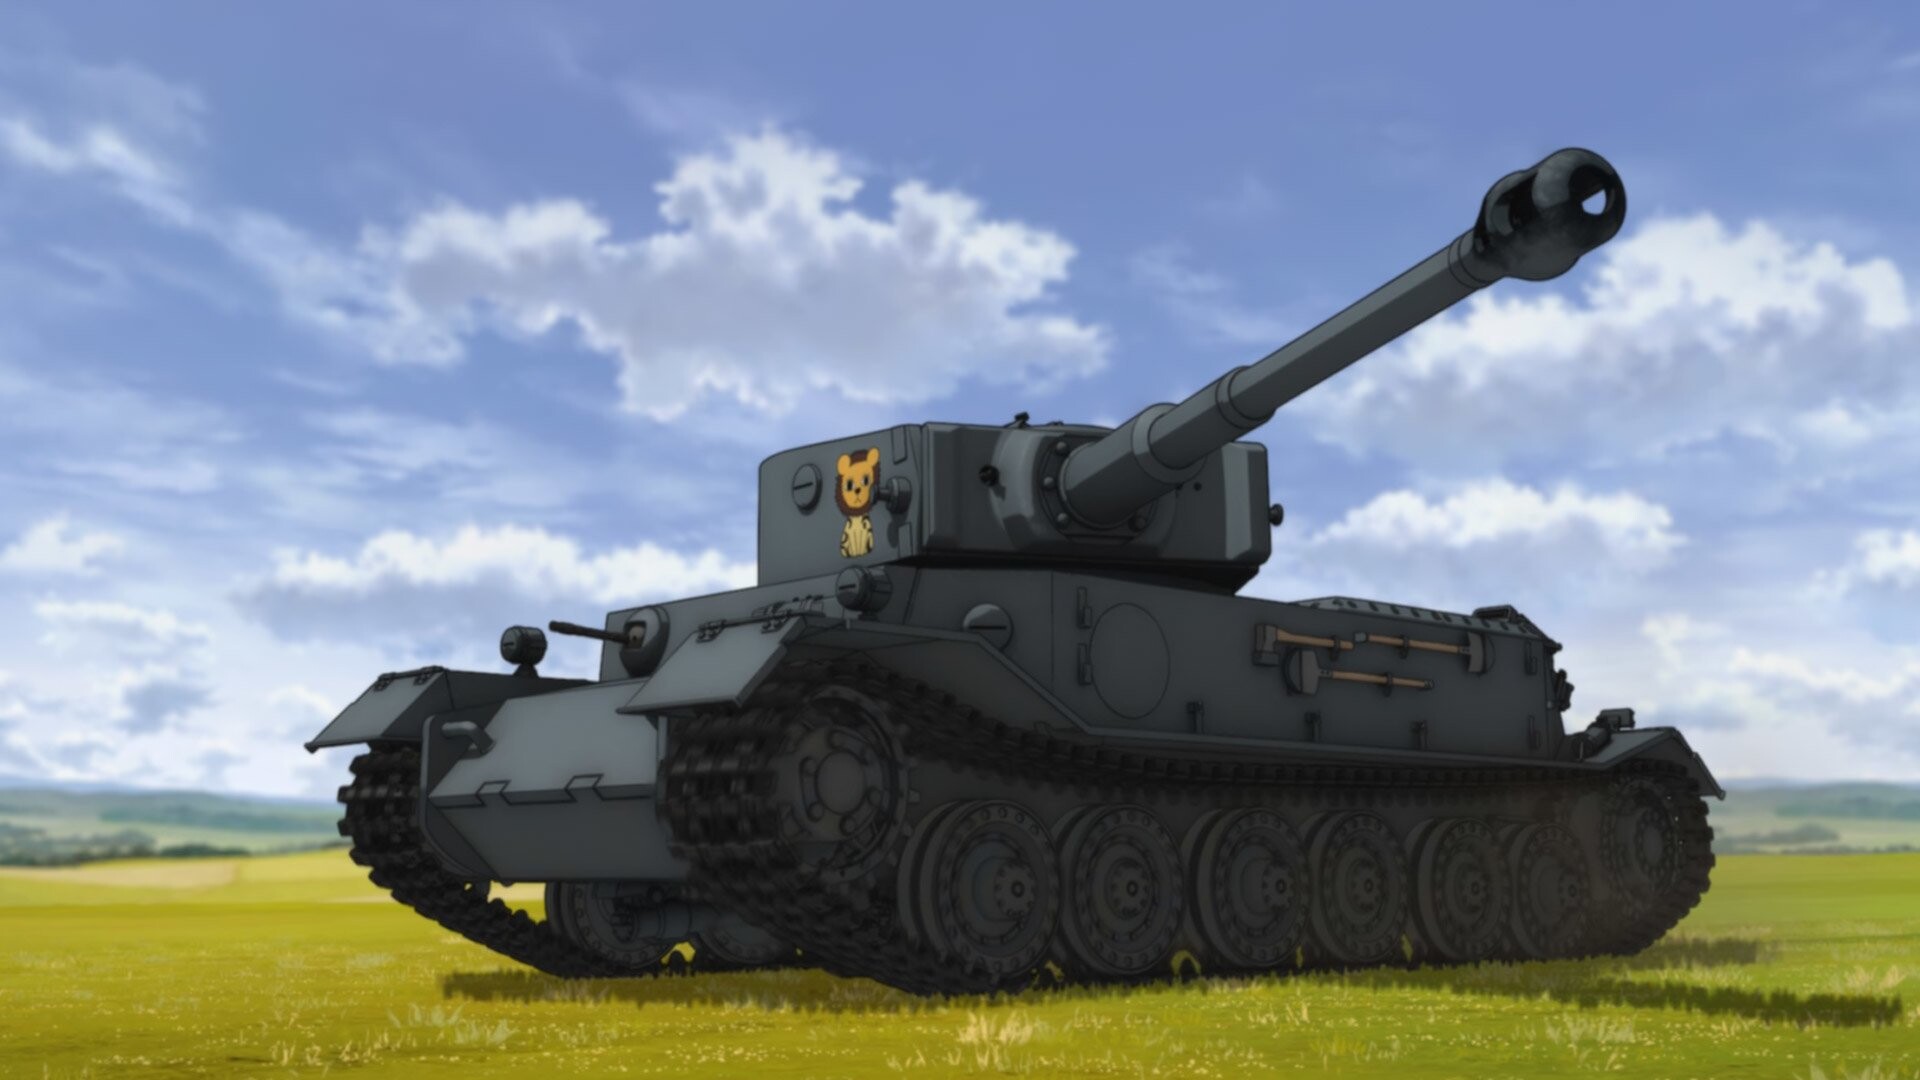 Girls und Panzer: The Tiger (P), Porsche Tiger, An German tank first appeared in the anime during Episode 7. 1920x1080 Full HD Wallpaper.